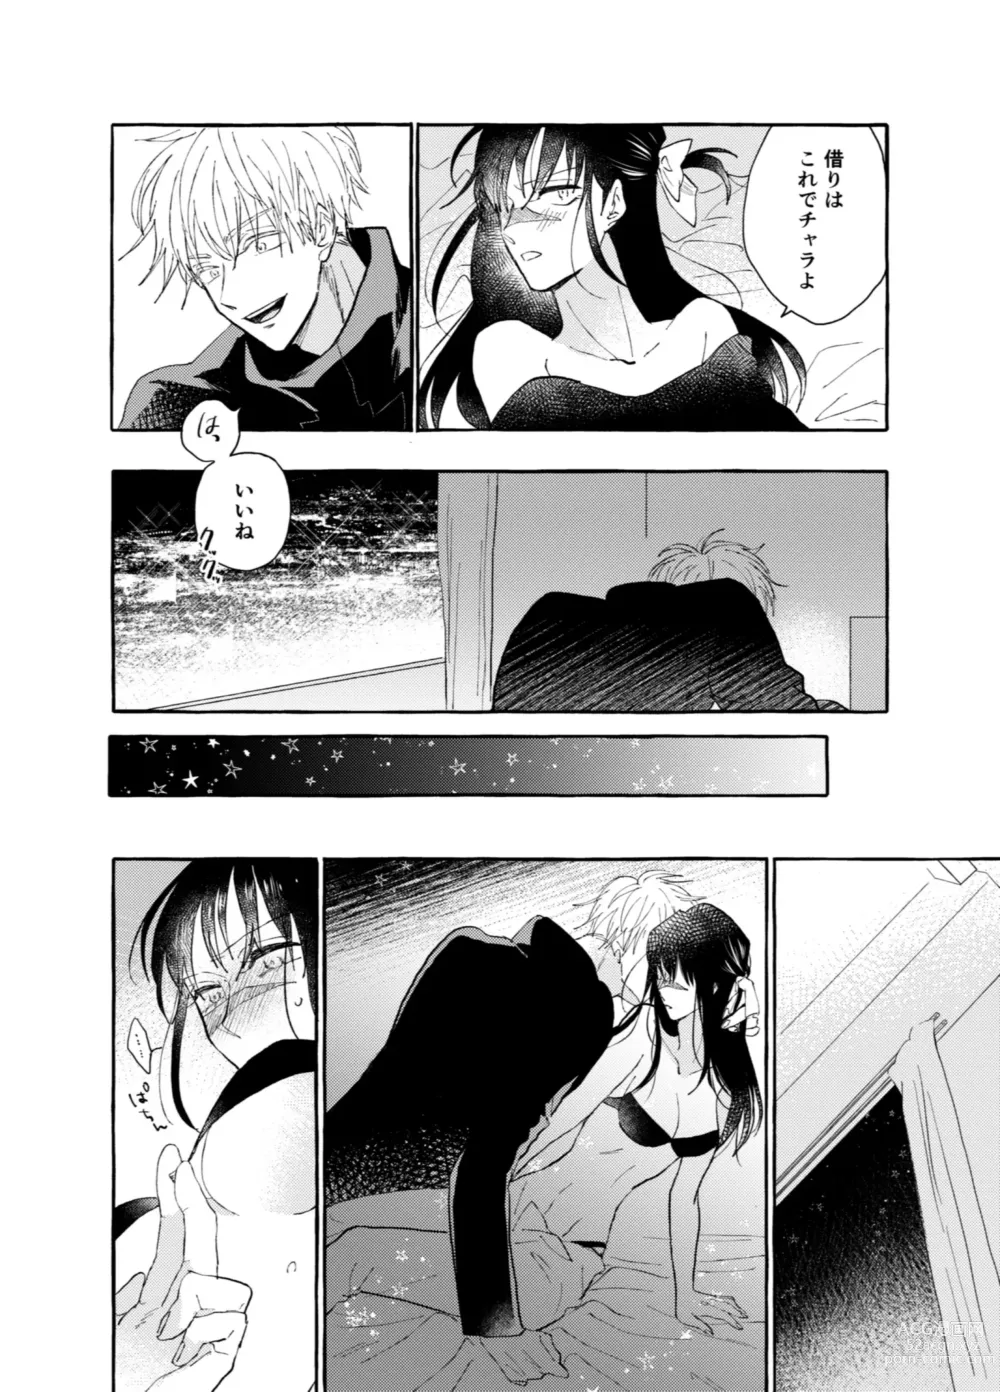 Page 11 of doujinshi One of These Nights